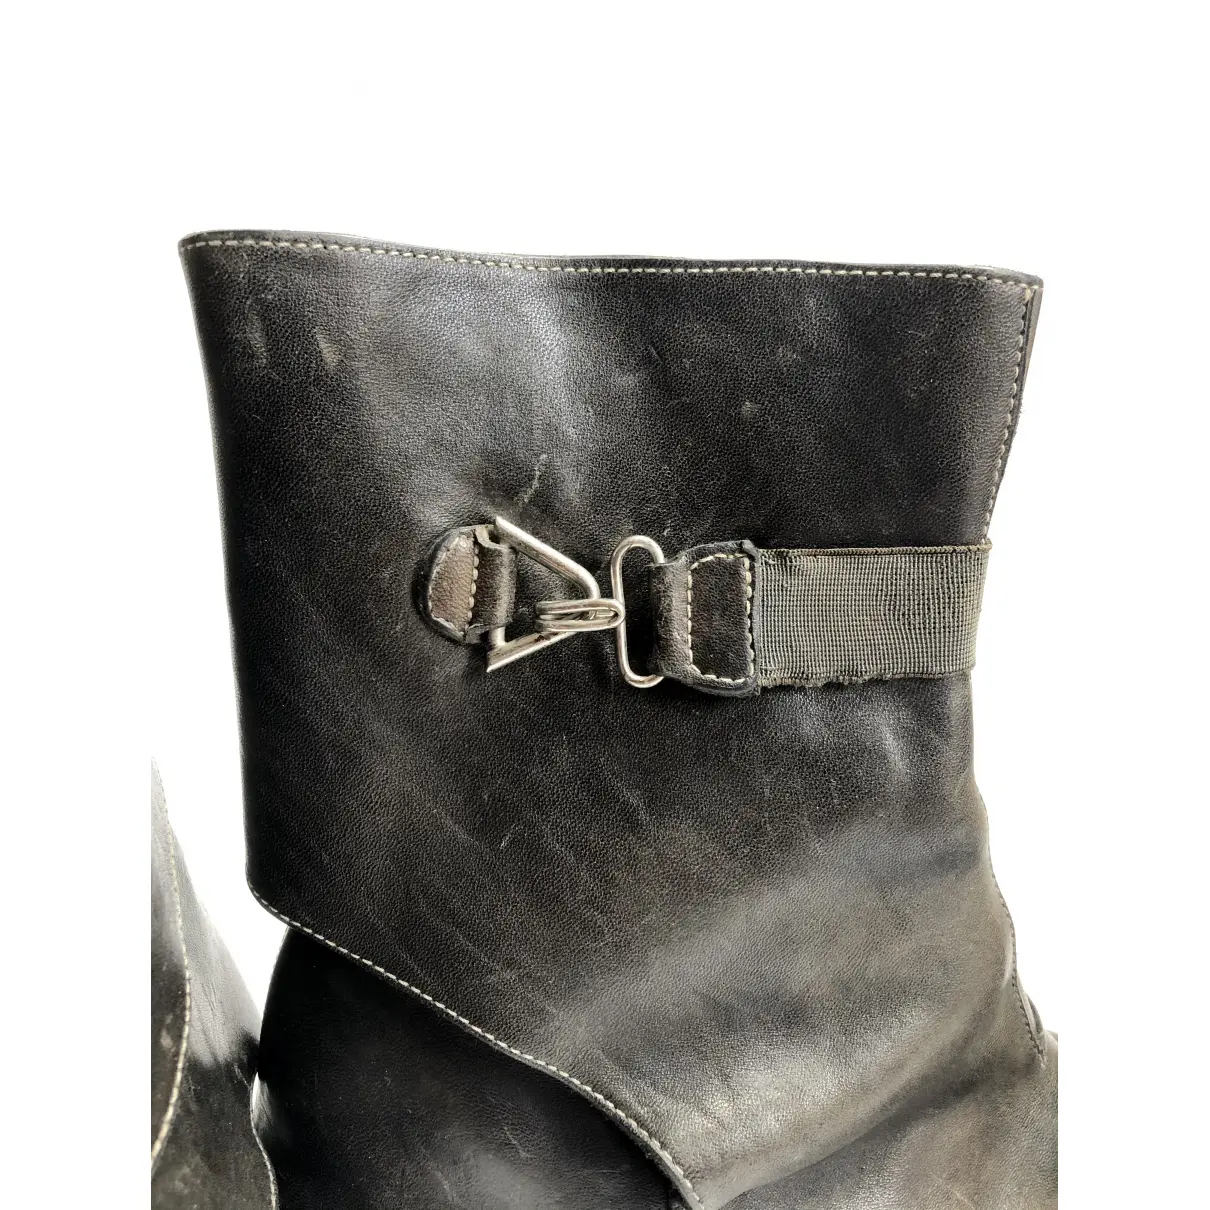 Leather boots Carol Christian Poell - Vintage